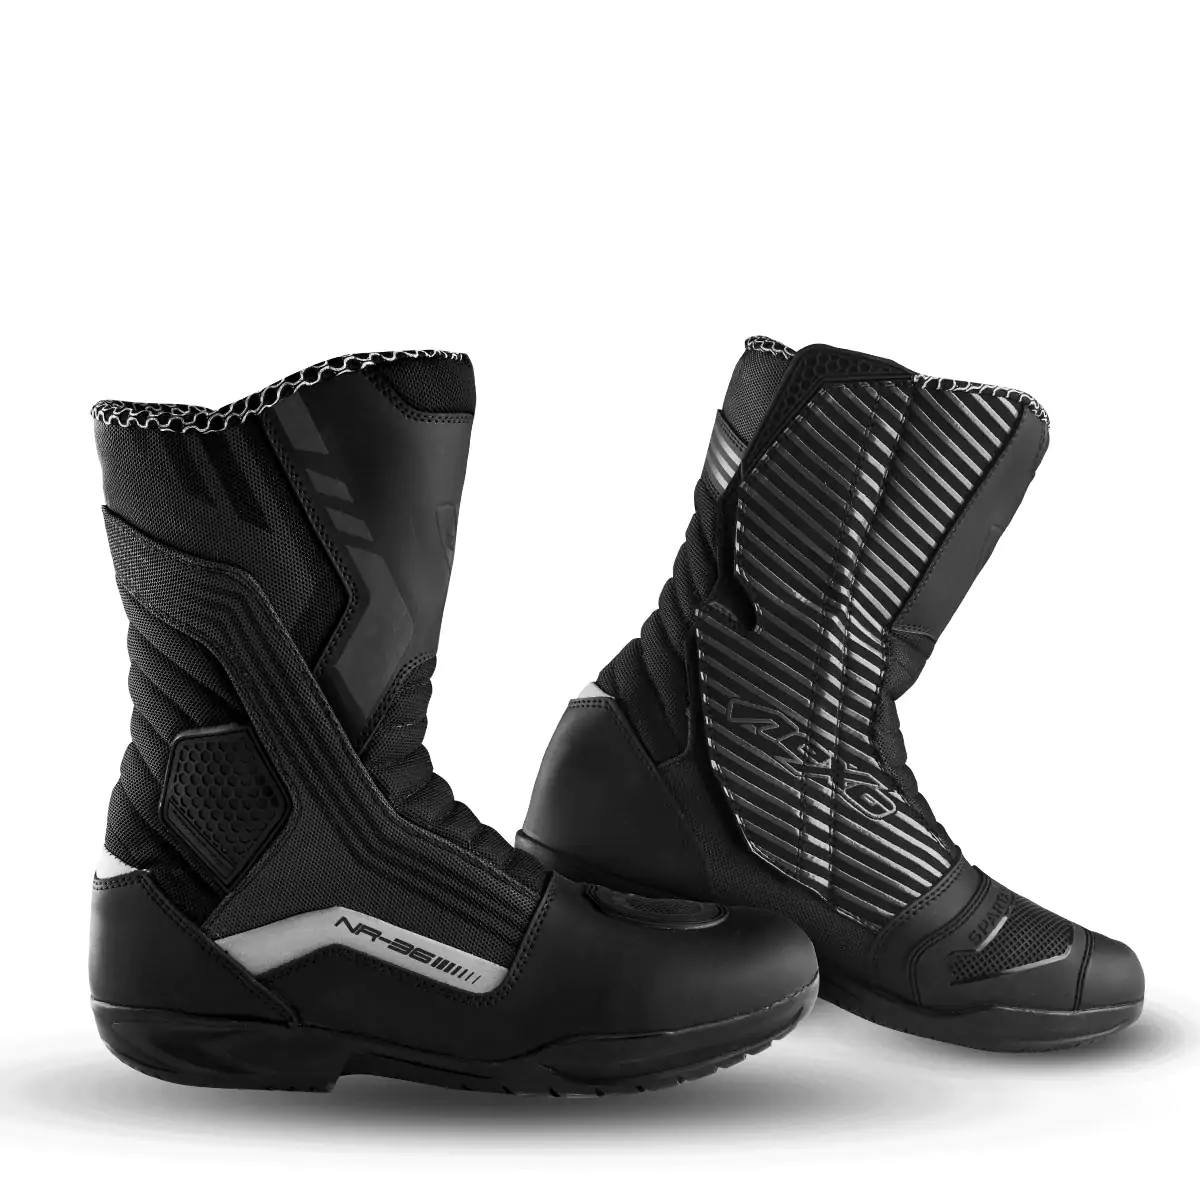 long black touring boots pair with a touch of white color